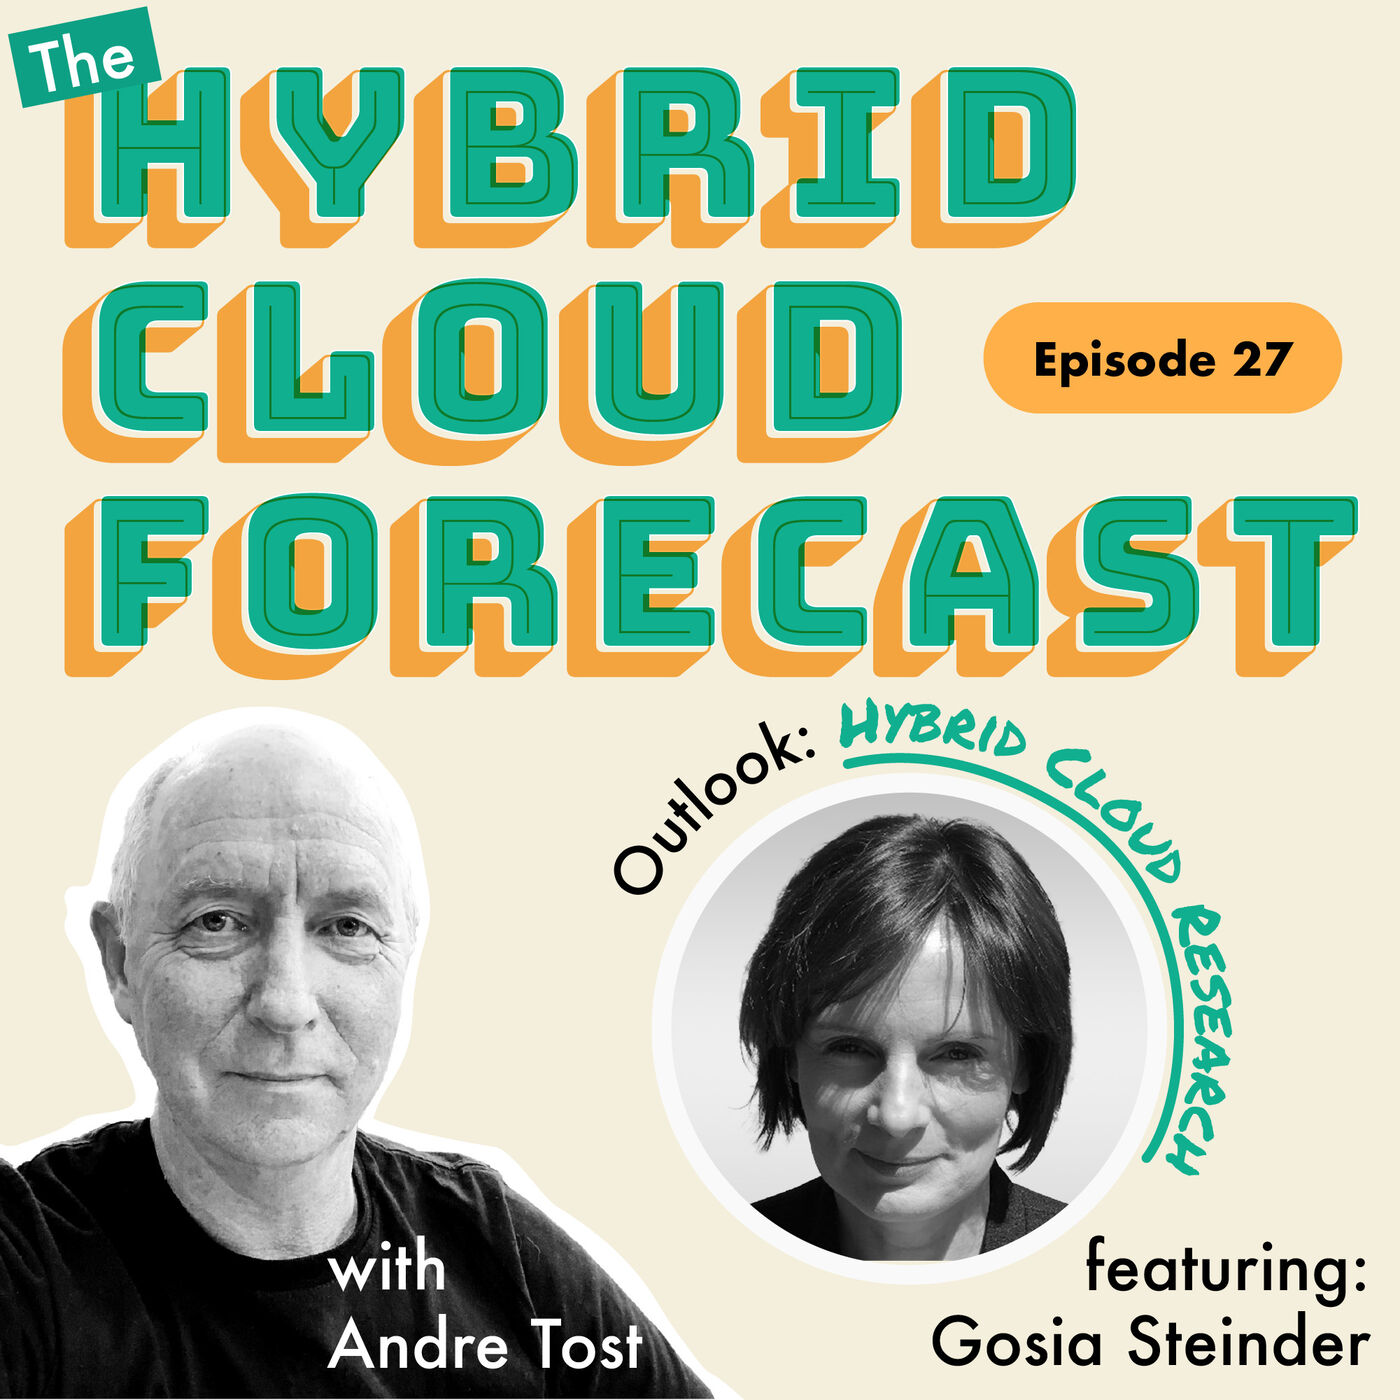 Episode 27: The Hybrid Cloud Forecast Series – Outlook: Hybrid Cloud Research